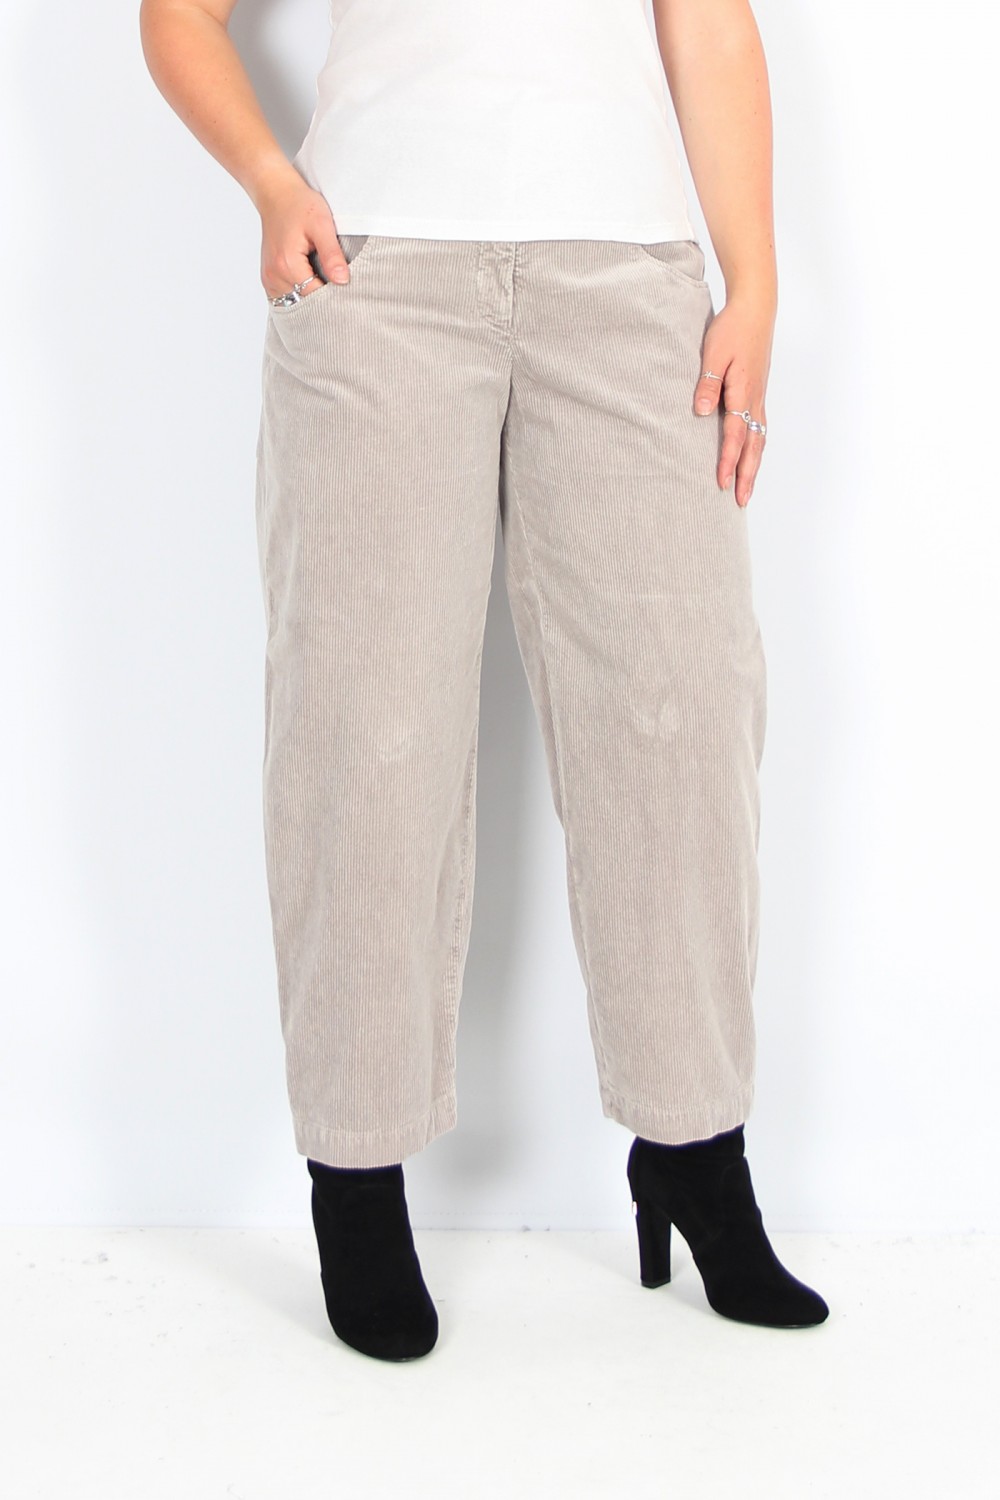 OSKA Trousers Kahren 314 Moon / Cotton Cord With Stretch Content